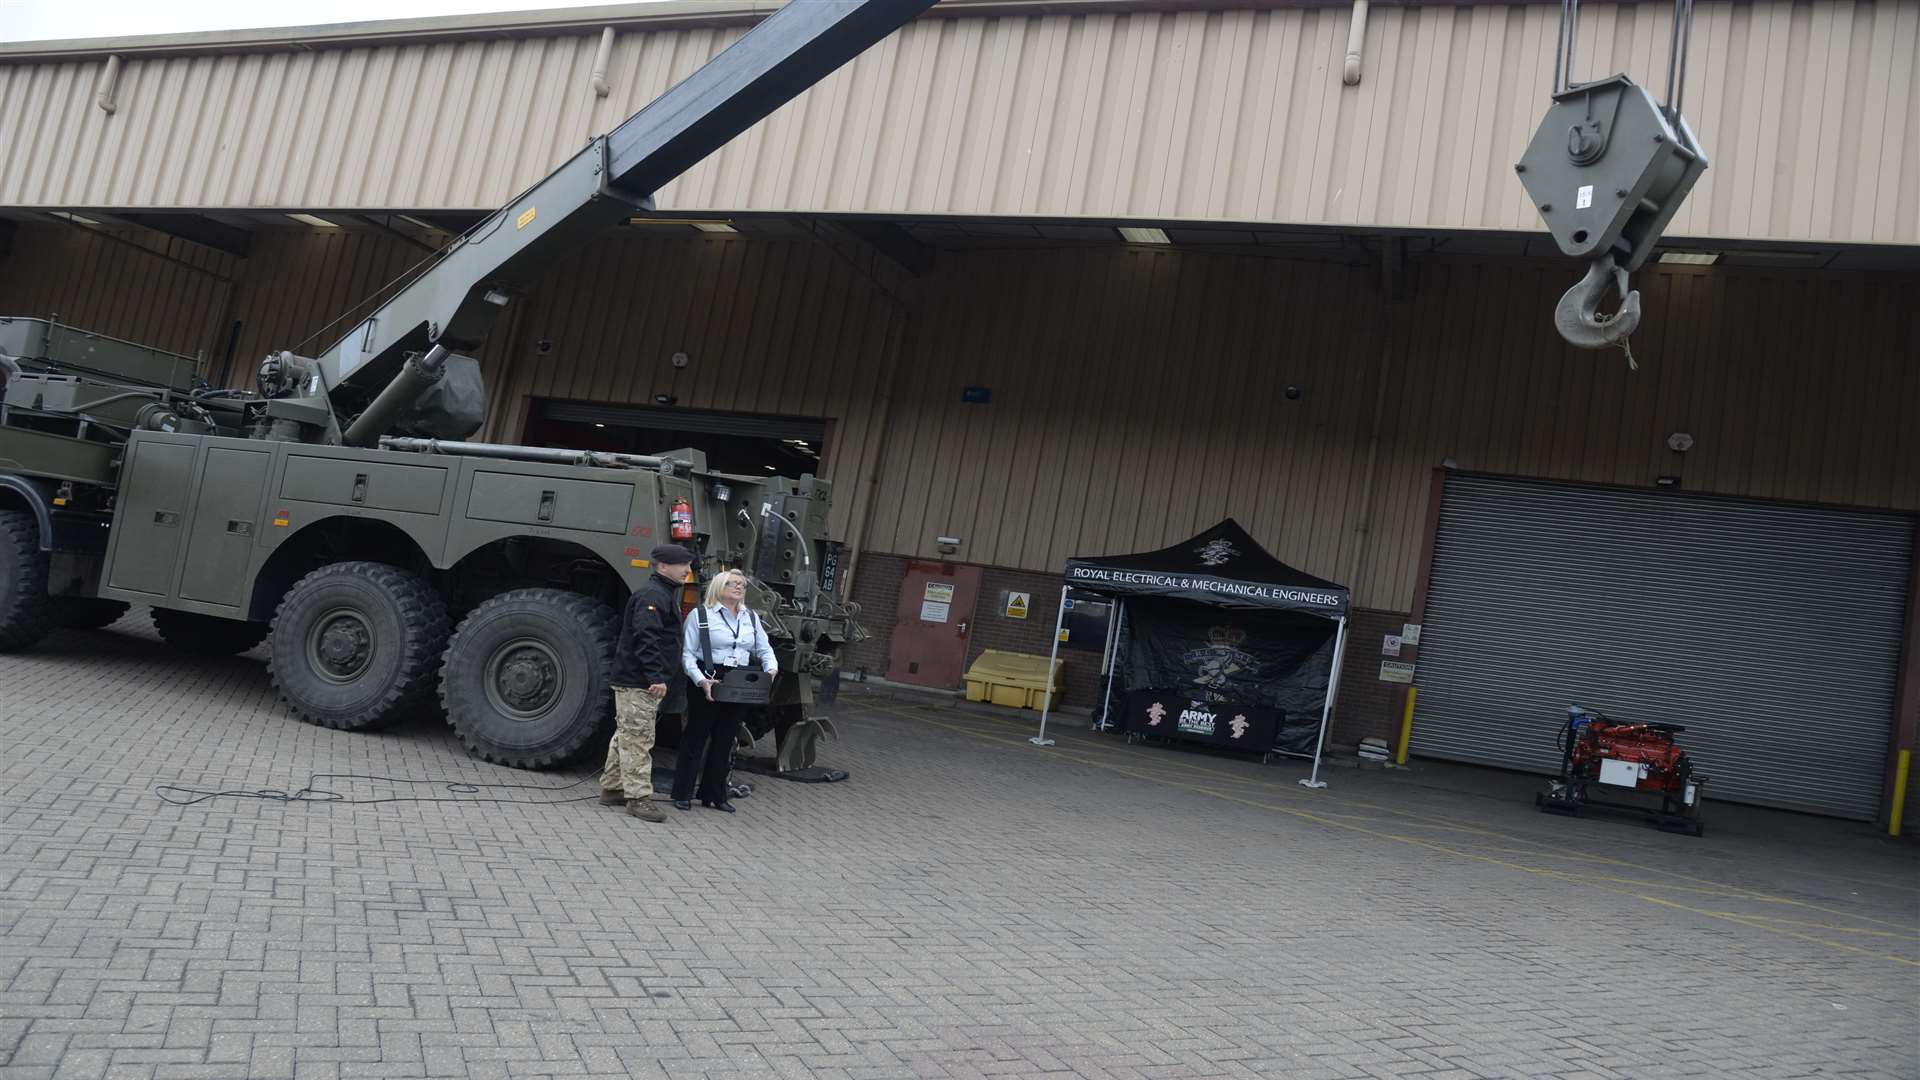 L Cpl James Hamilton of the Royal Electrical and Mechanical Engineers coaches Mainstream's Melanie Baker on the controls of an army recovery vehicle during the open day